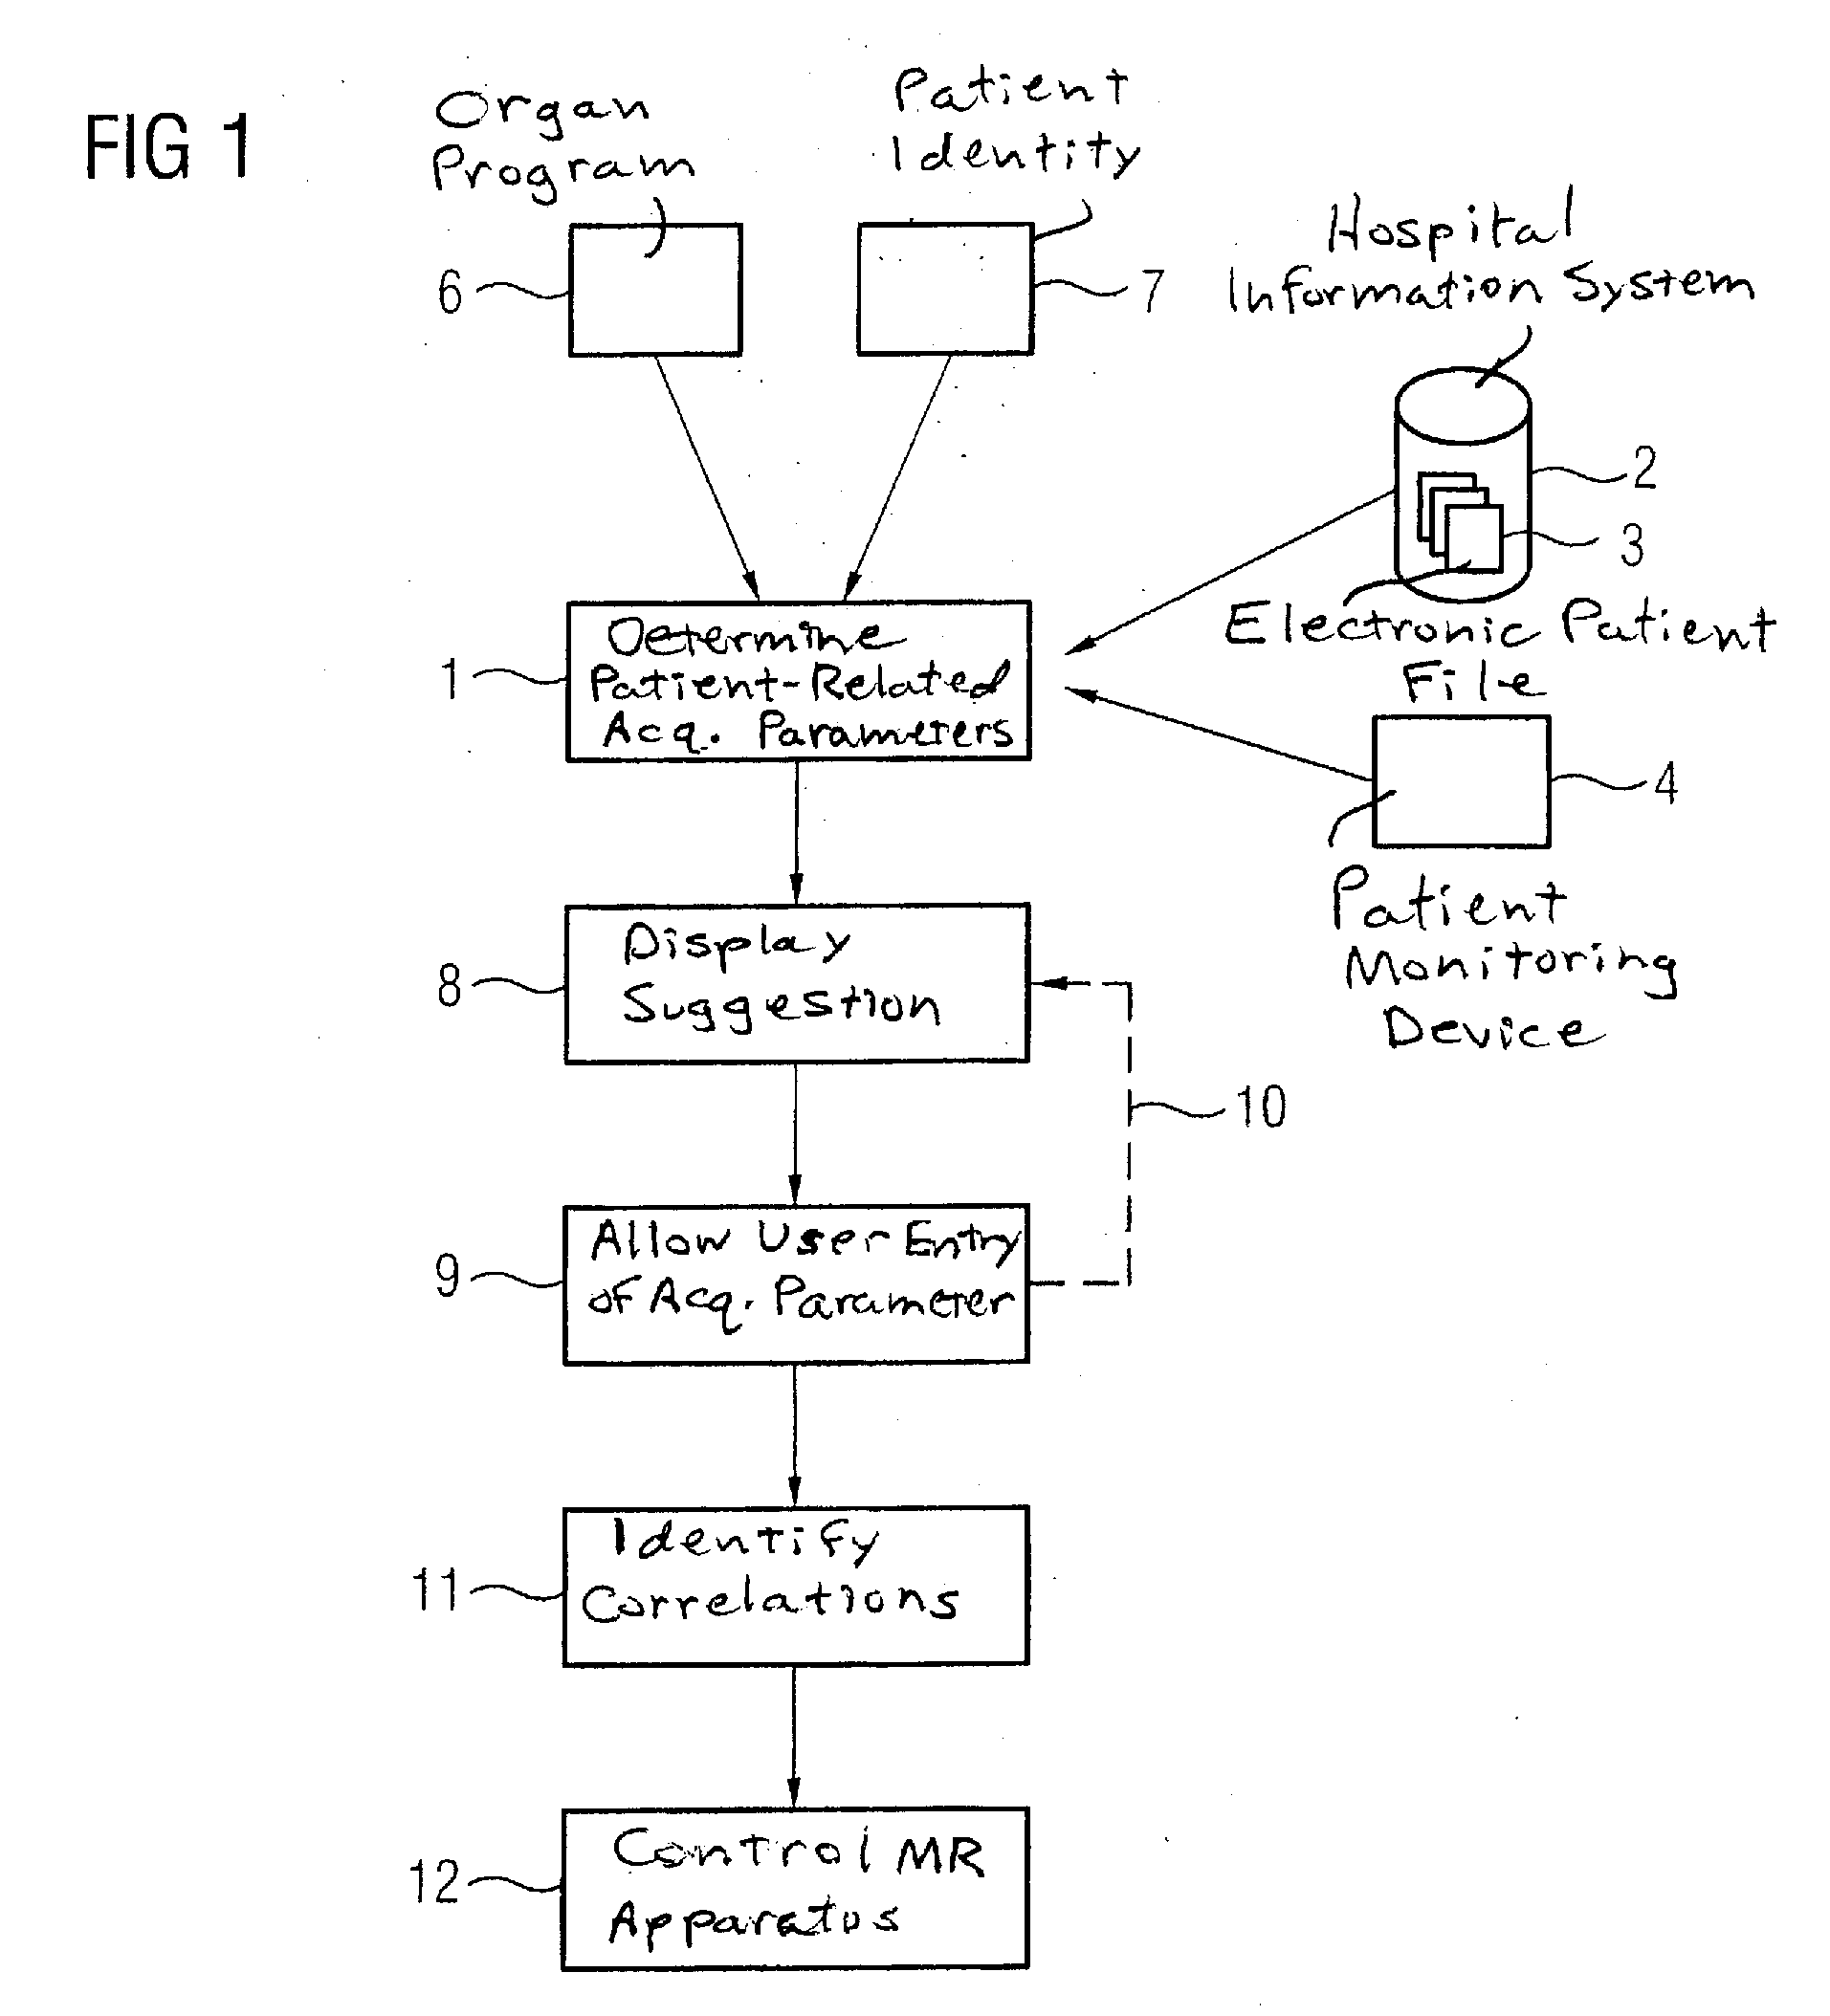 Method to control the acquisition operation of a magnetic resonance device in the acquisition of magnetic resonance data of a patient, and associated magnetic resonance device